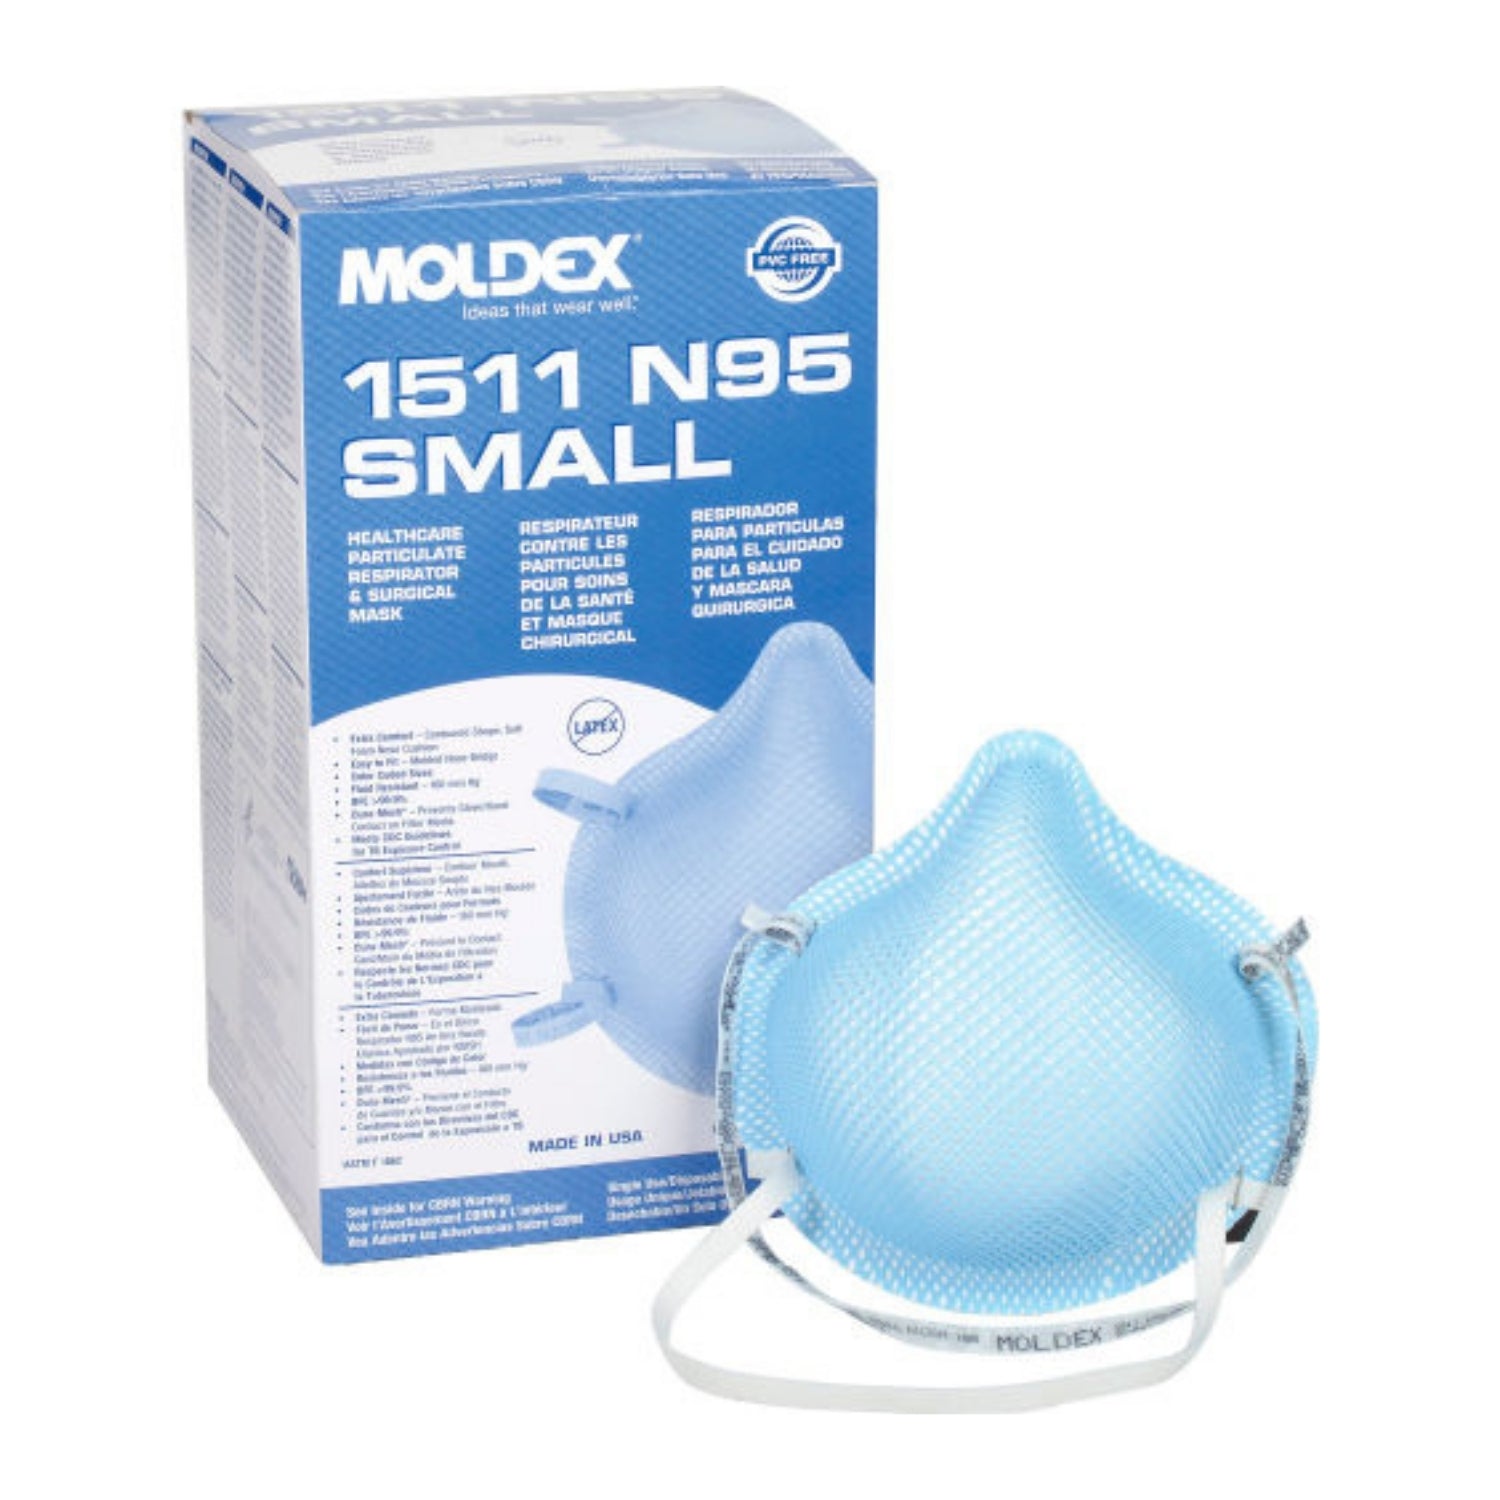 MOLDEX 1511 - N95 1500 Series  Healthcare Particulate Respirators and Surgical Masks, Small - 20/BOX